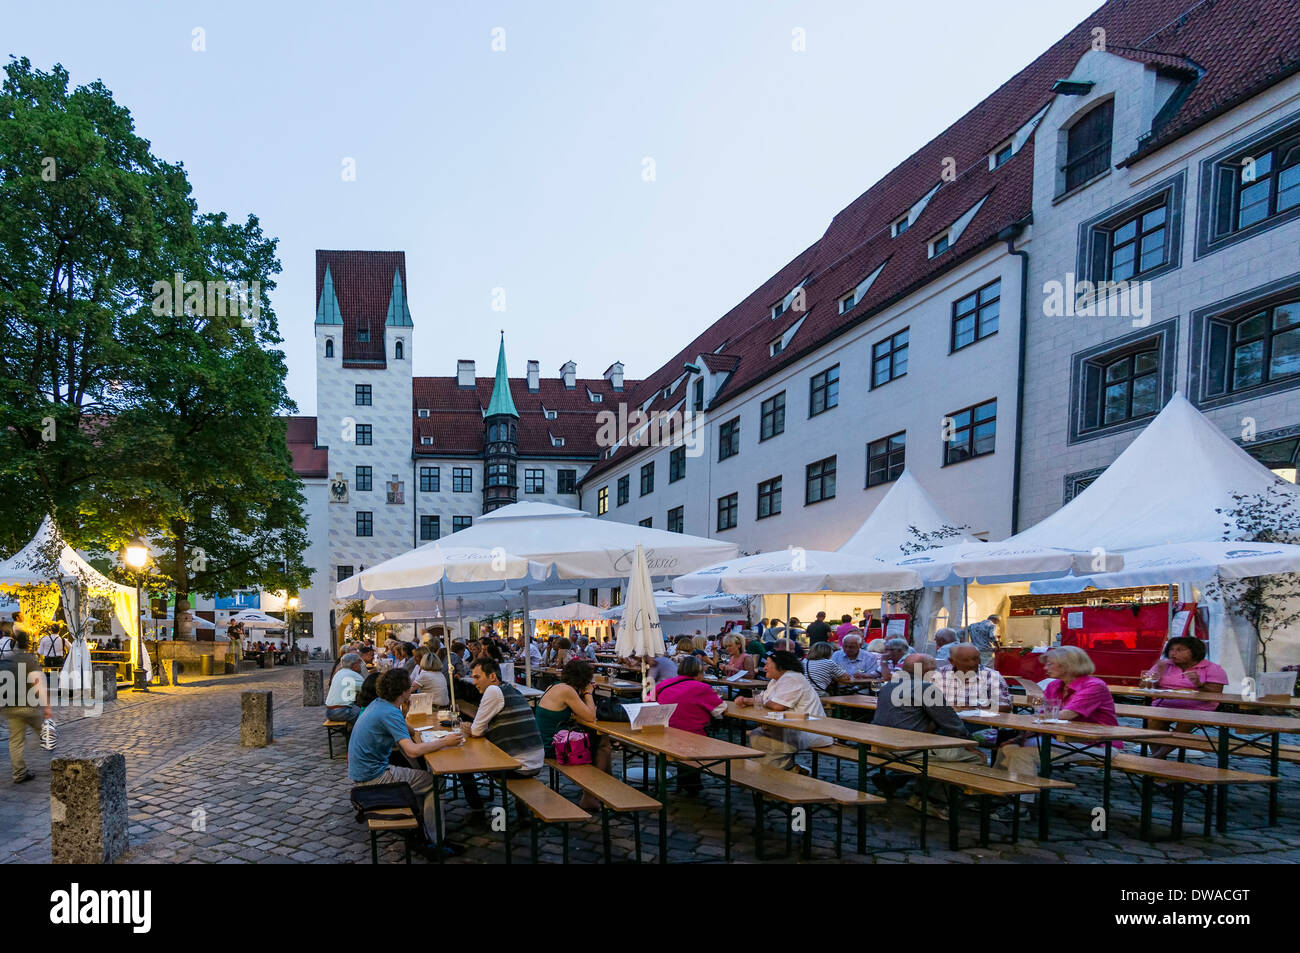 Wine Festival in Old Courtyard, Munich, Germany Stock Photo